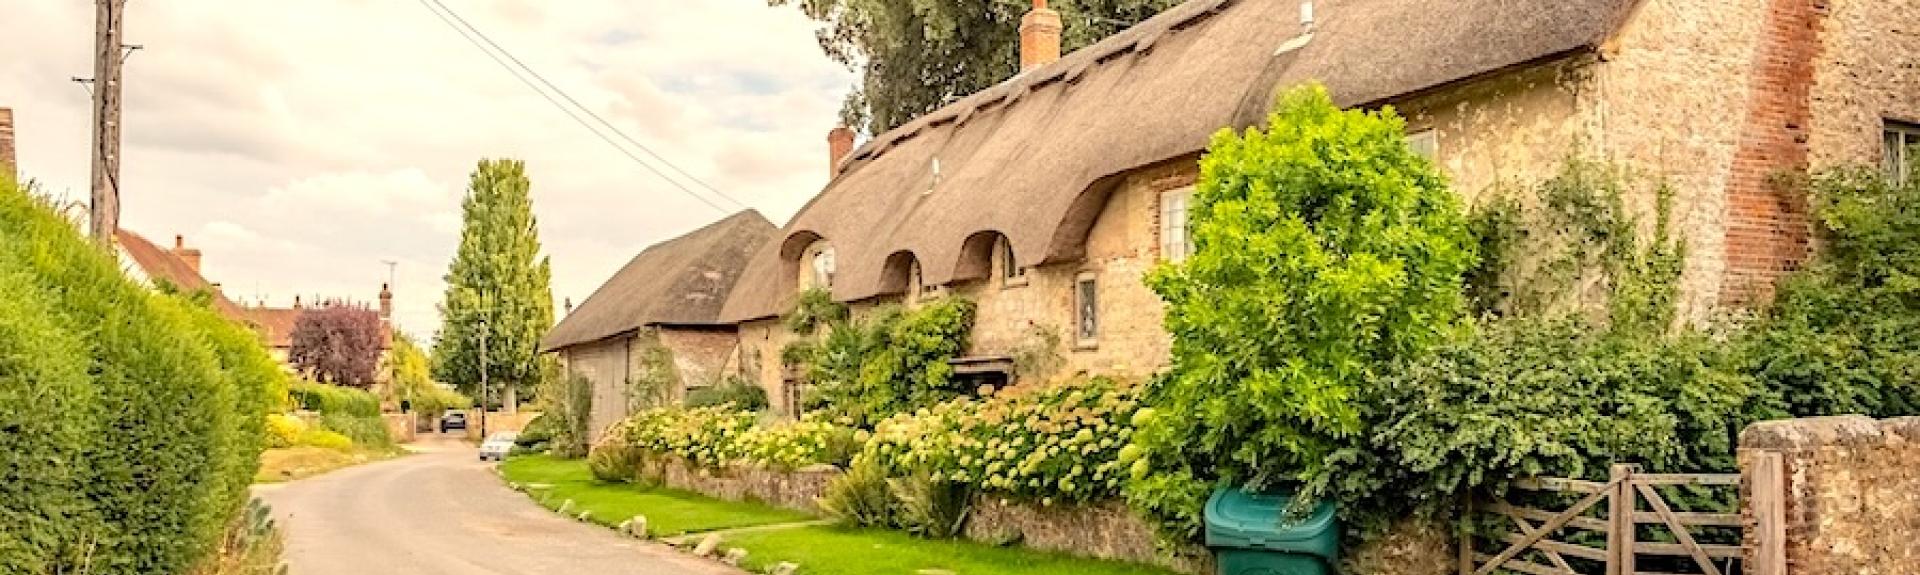 A row of thatched cottages with flower-filled front gardens overlook an empty village street.